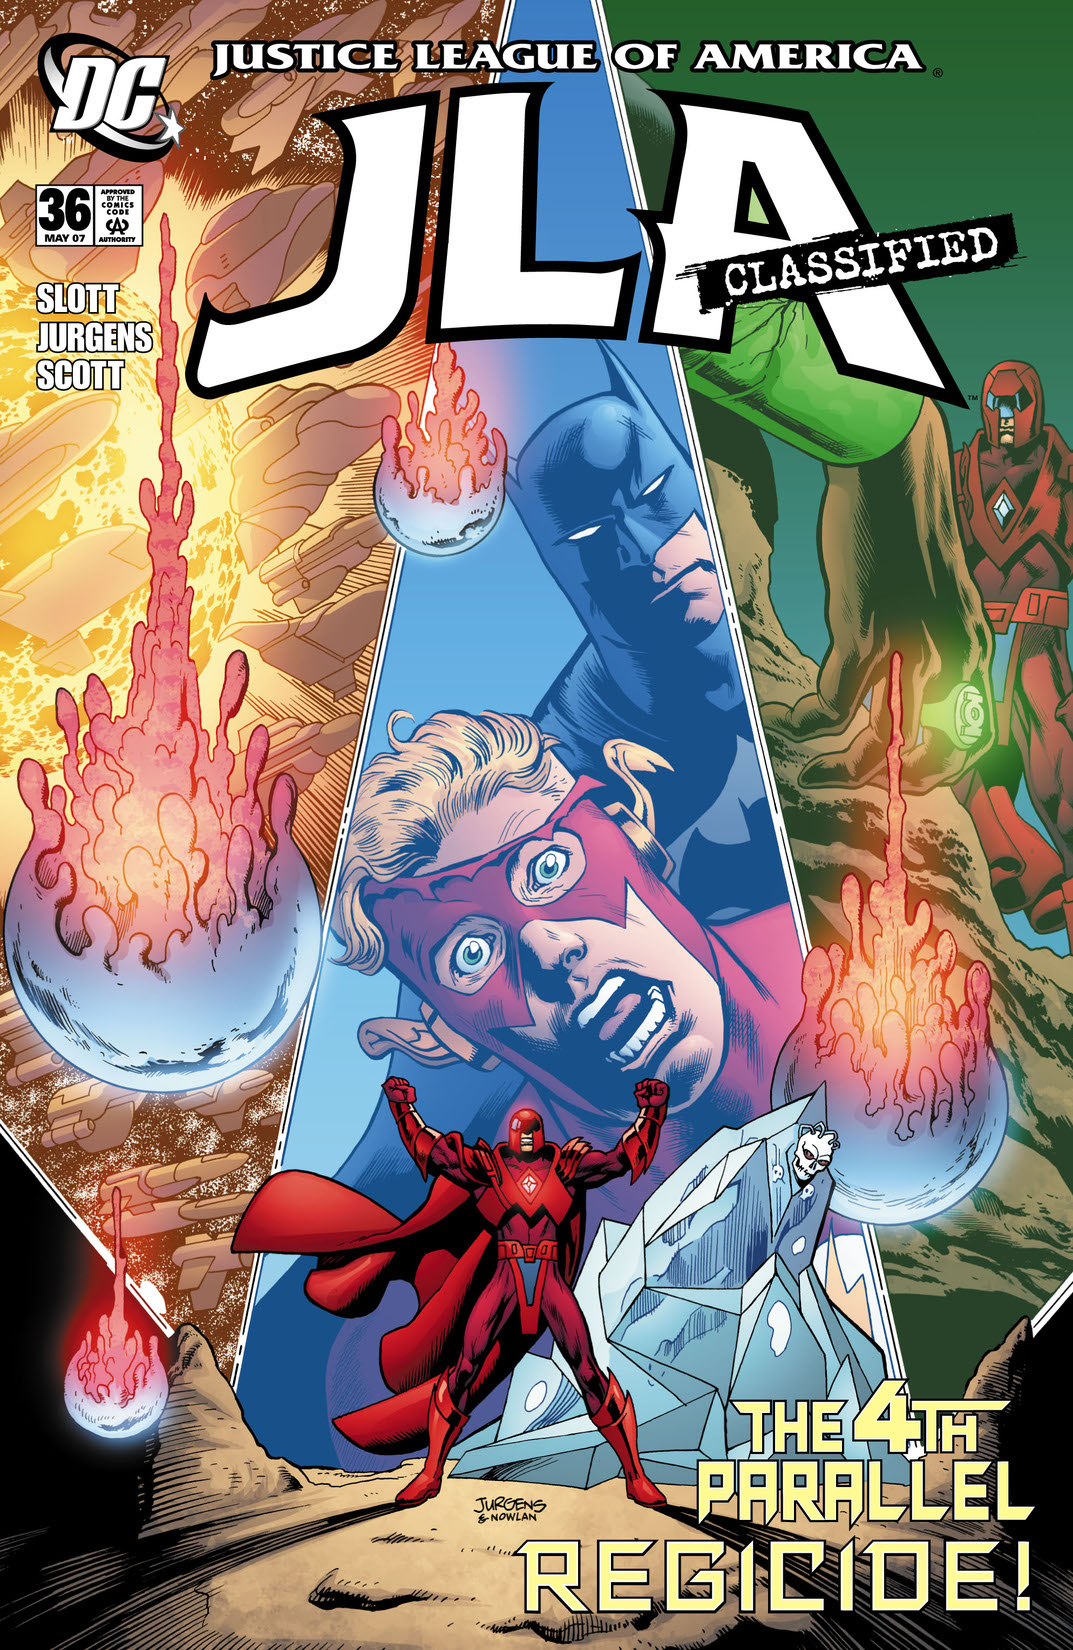 JLA: Classified #36 preview images